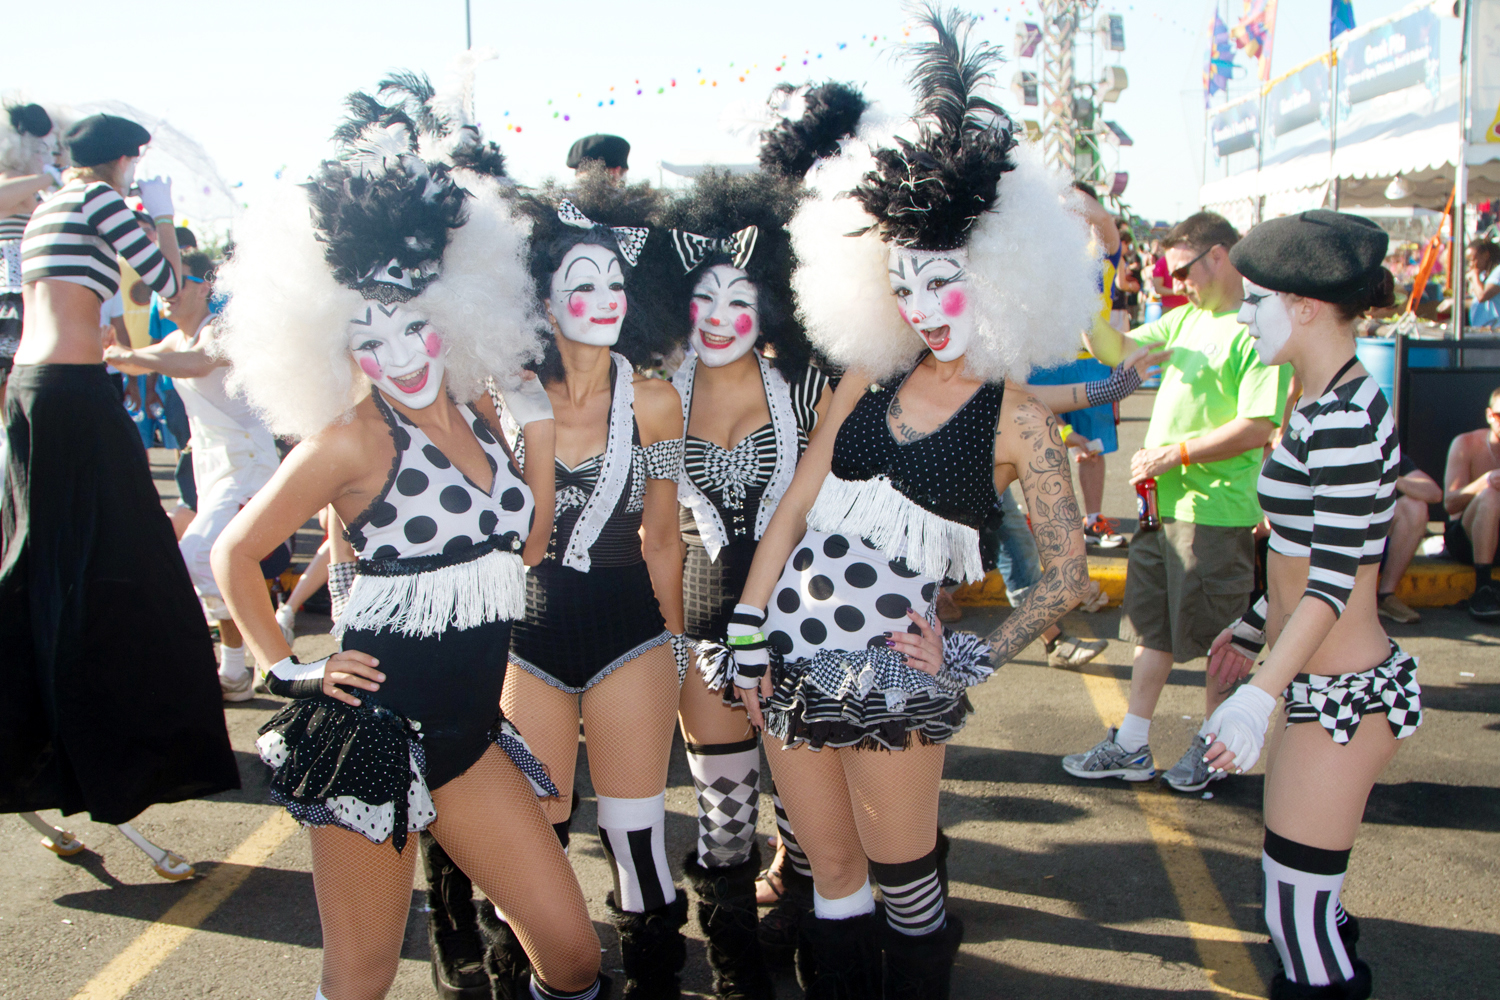 Electric Daisy Carnival NY Day 2 at MetLife Stadium on May 19, 2012